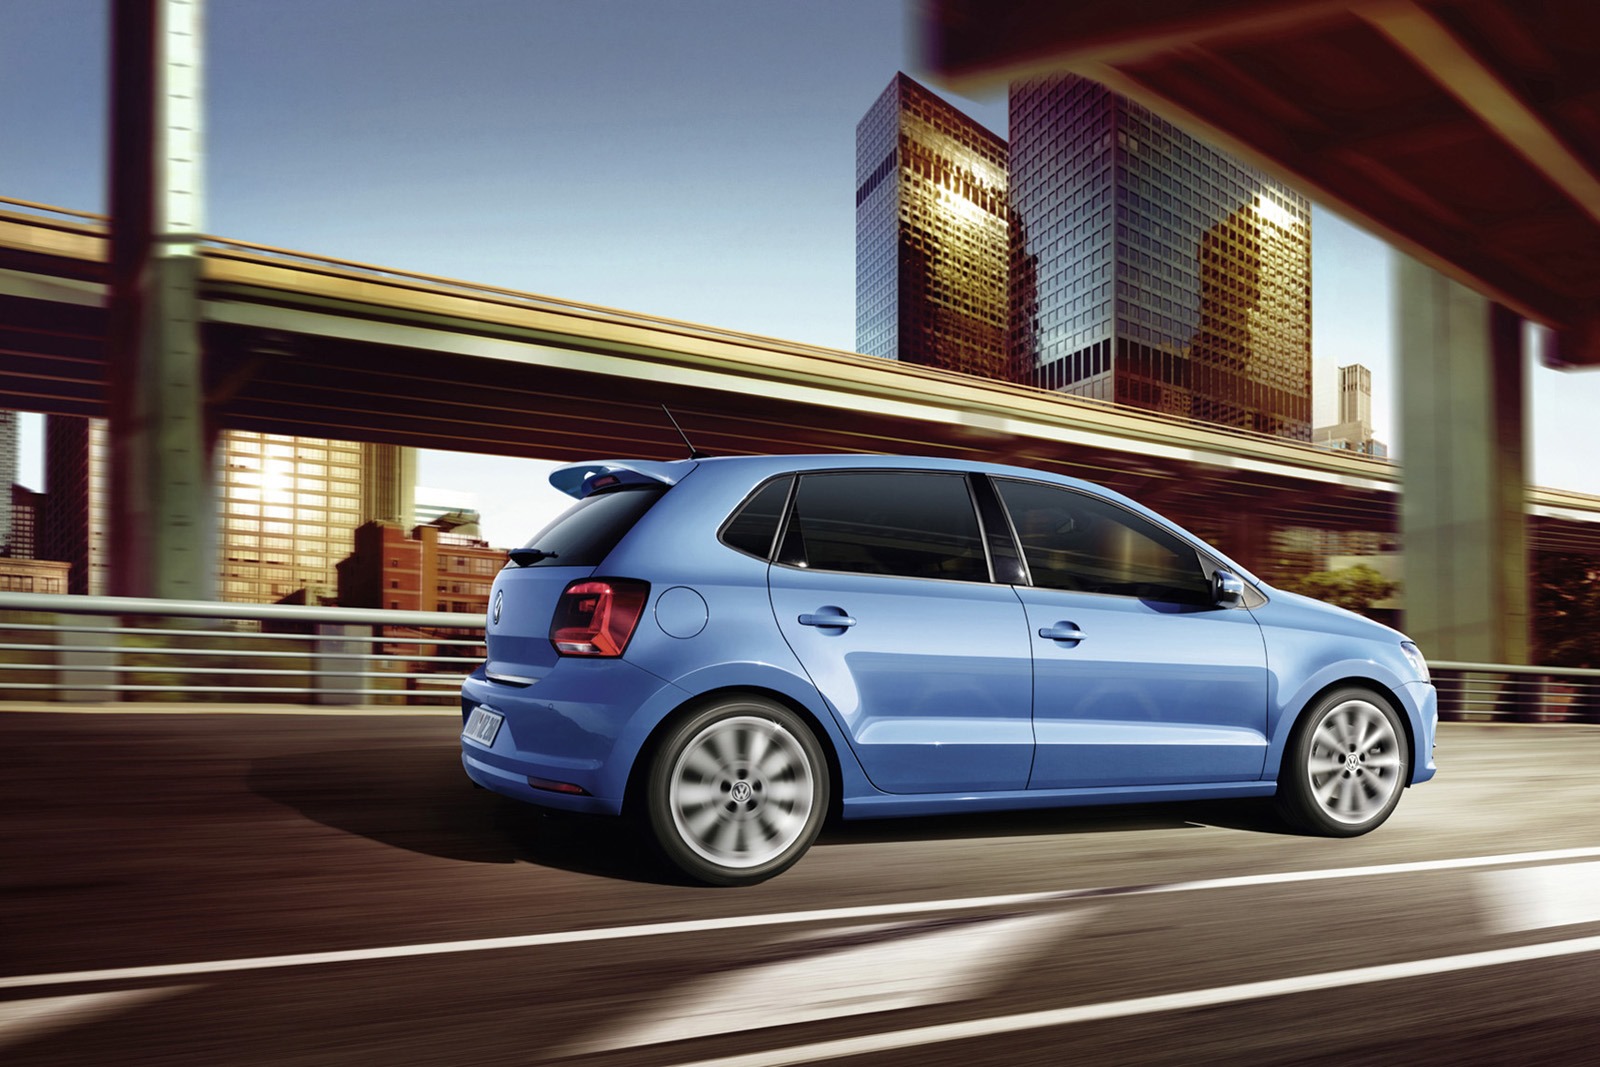 VW facelift accessories now available in